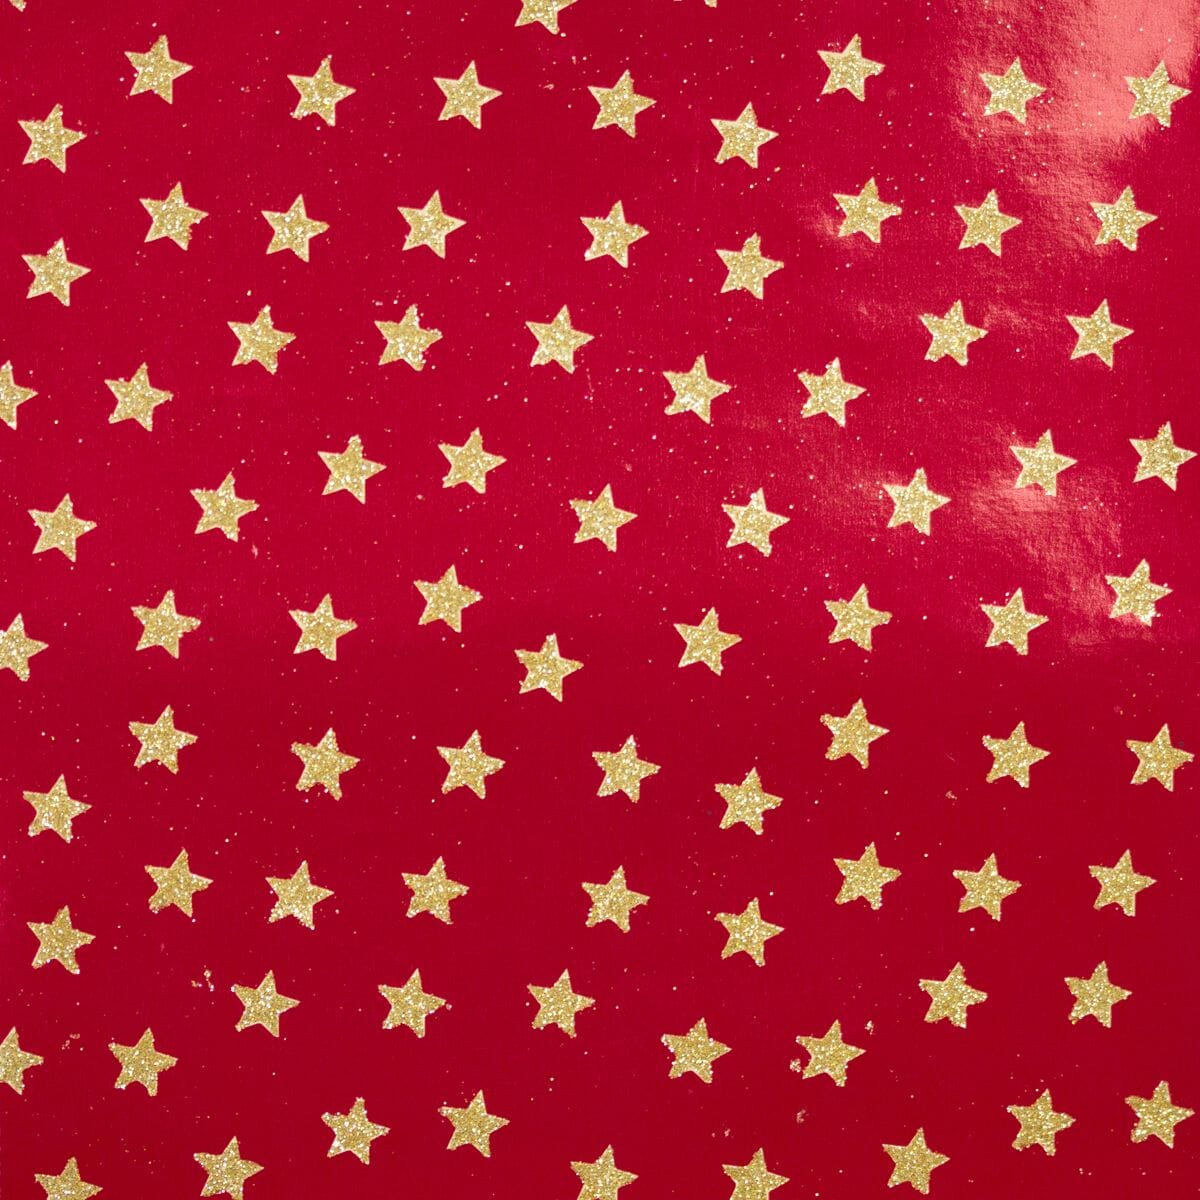 Gift Wrap - Glitter Rollwrap Paper Gift Wrap Roll - 2M - Ornate Brocade Gold Star On Red